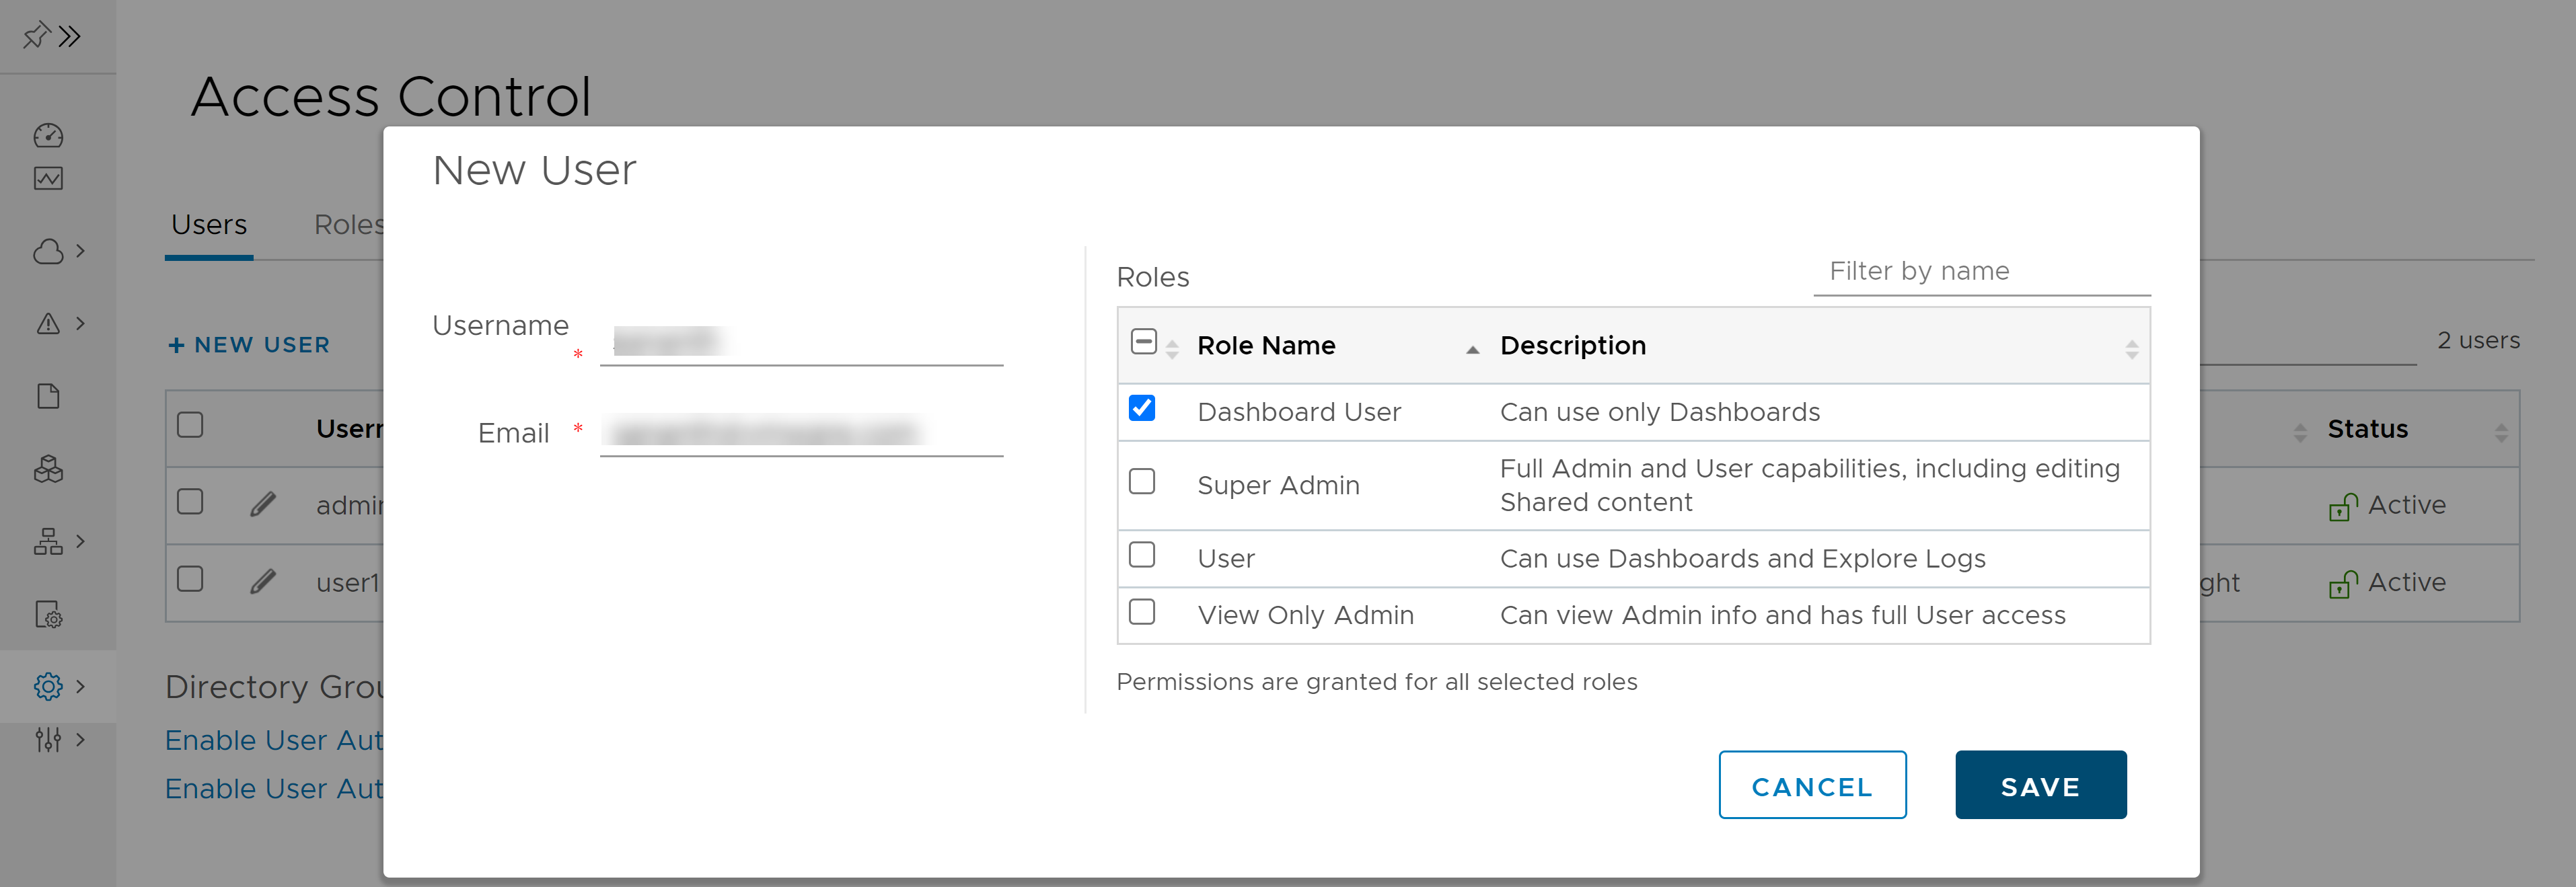 Adding a new user in the Access Control page.